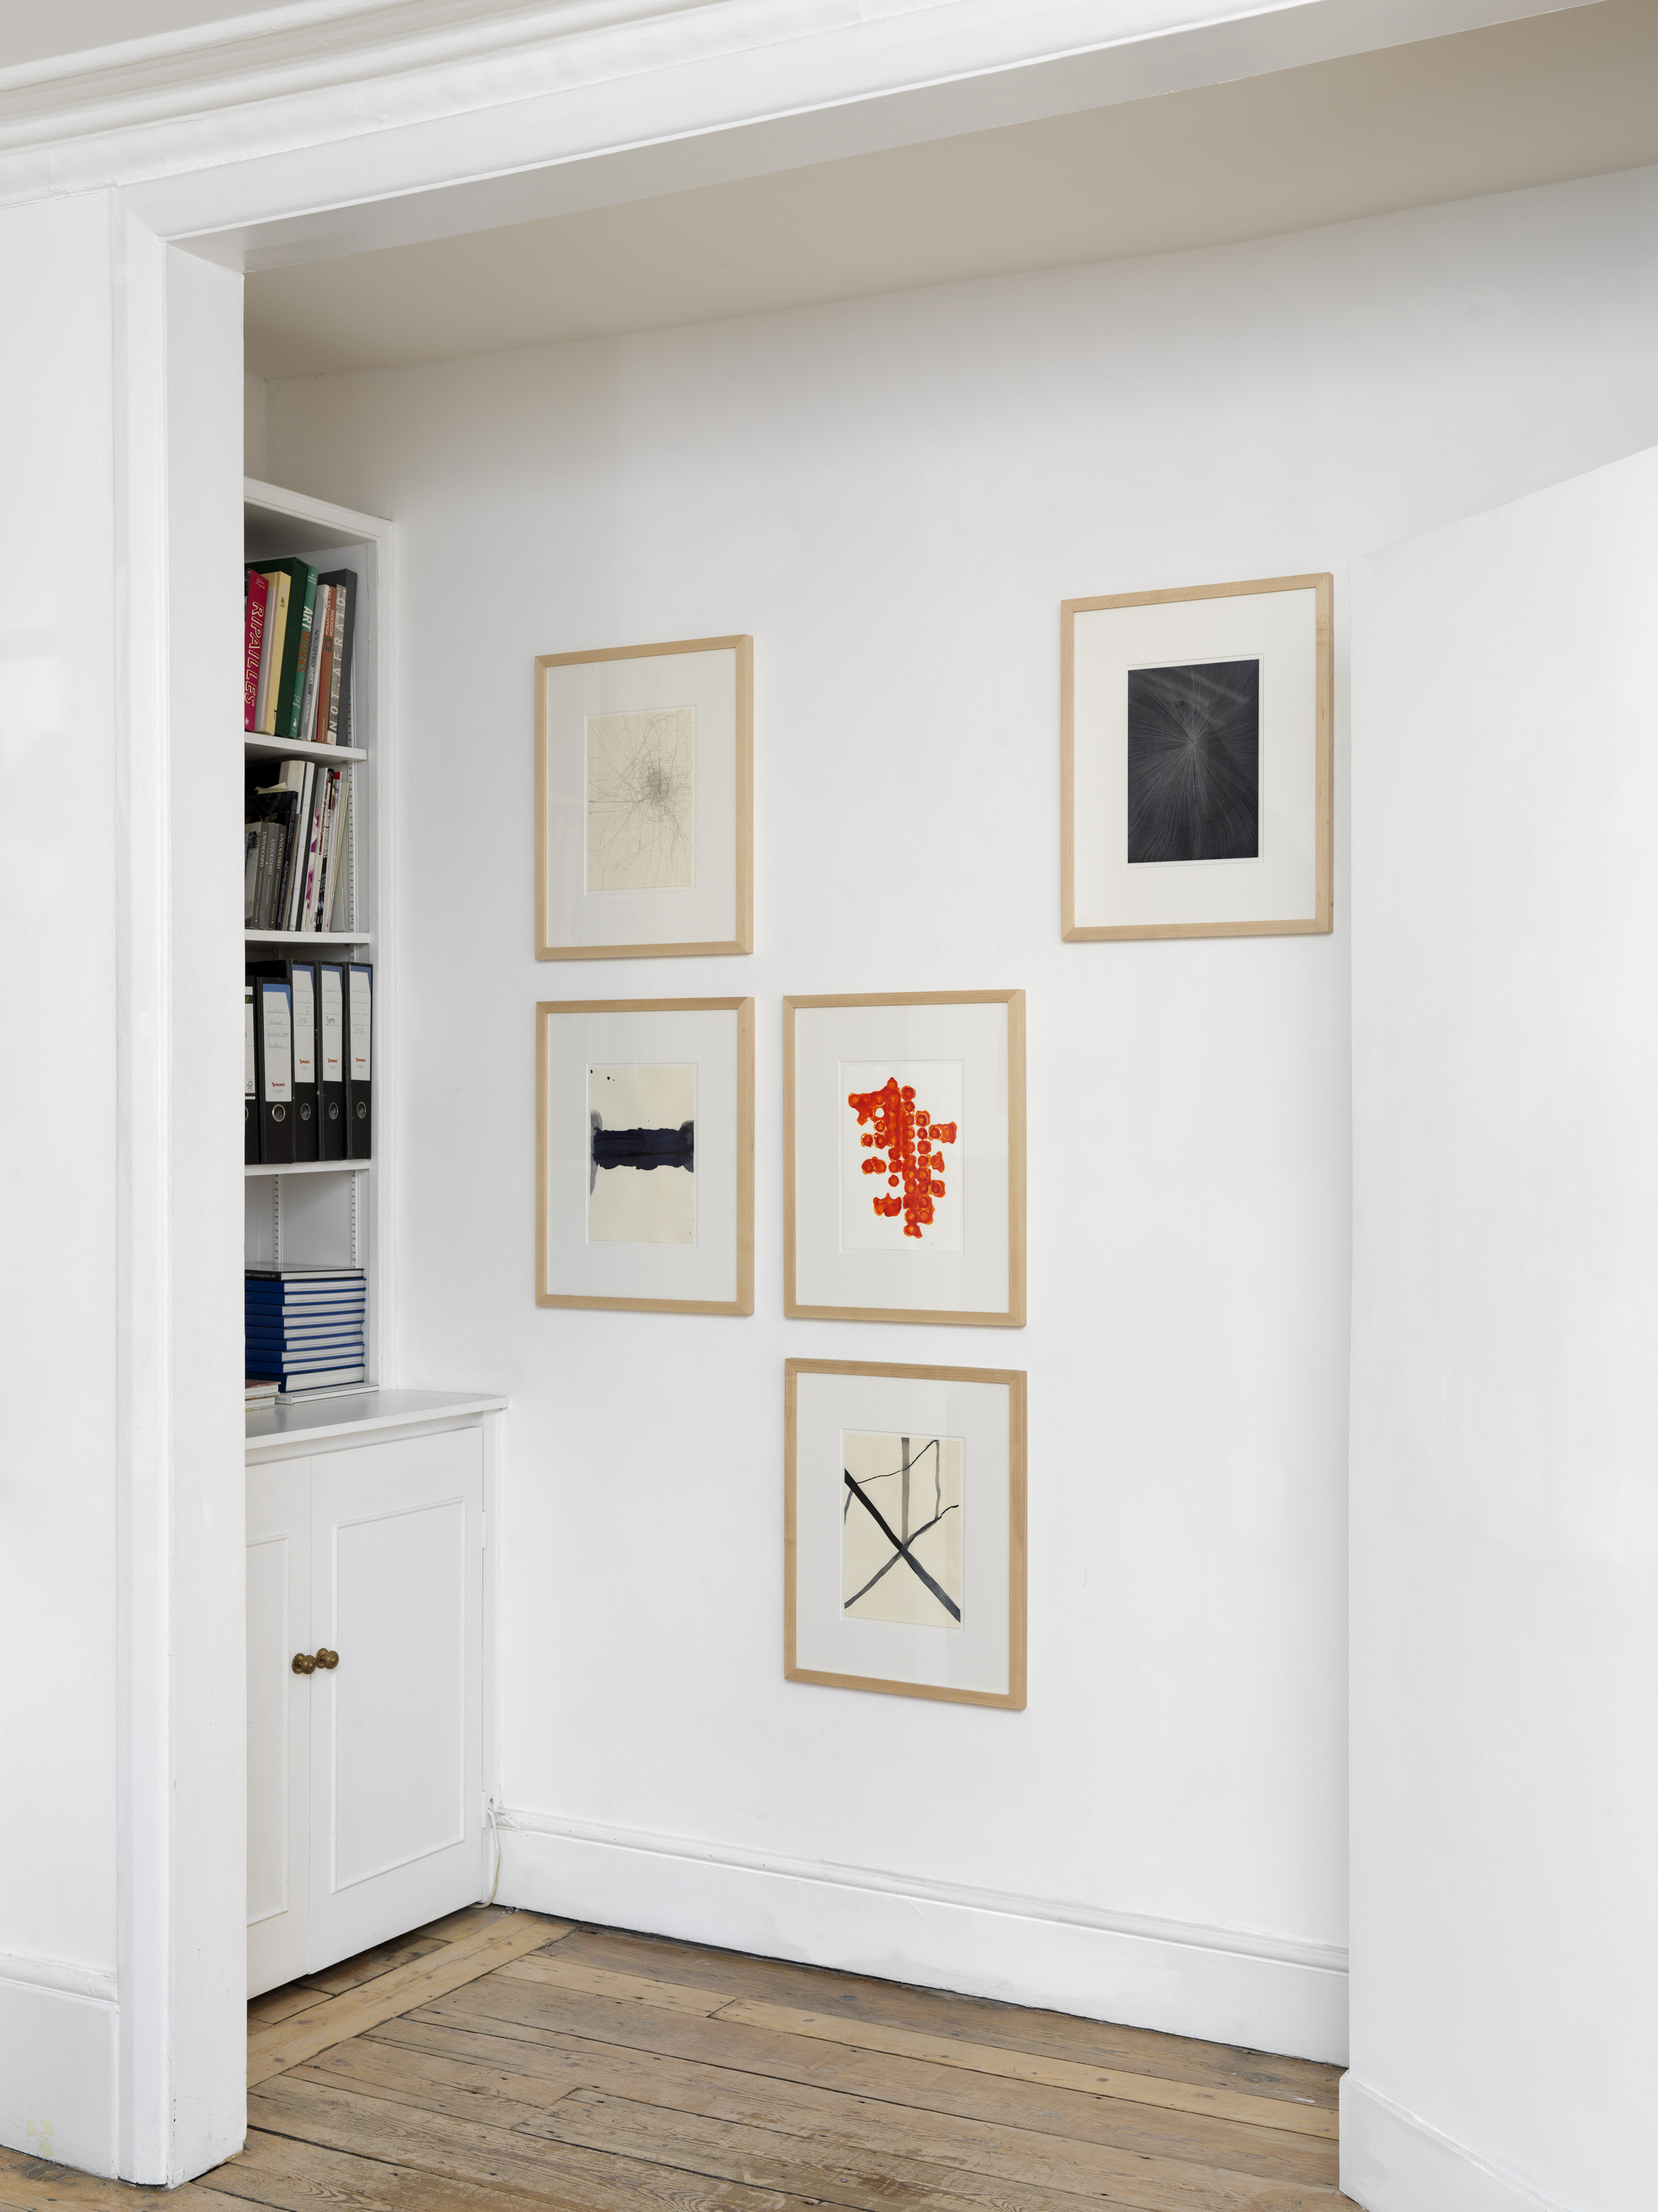 Thomas Müller, 'Recent Drawings' exhibition, installation view, 2023